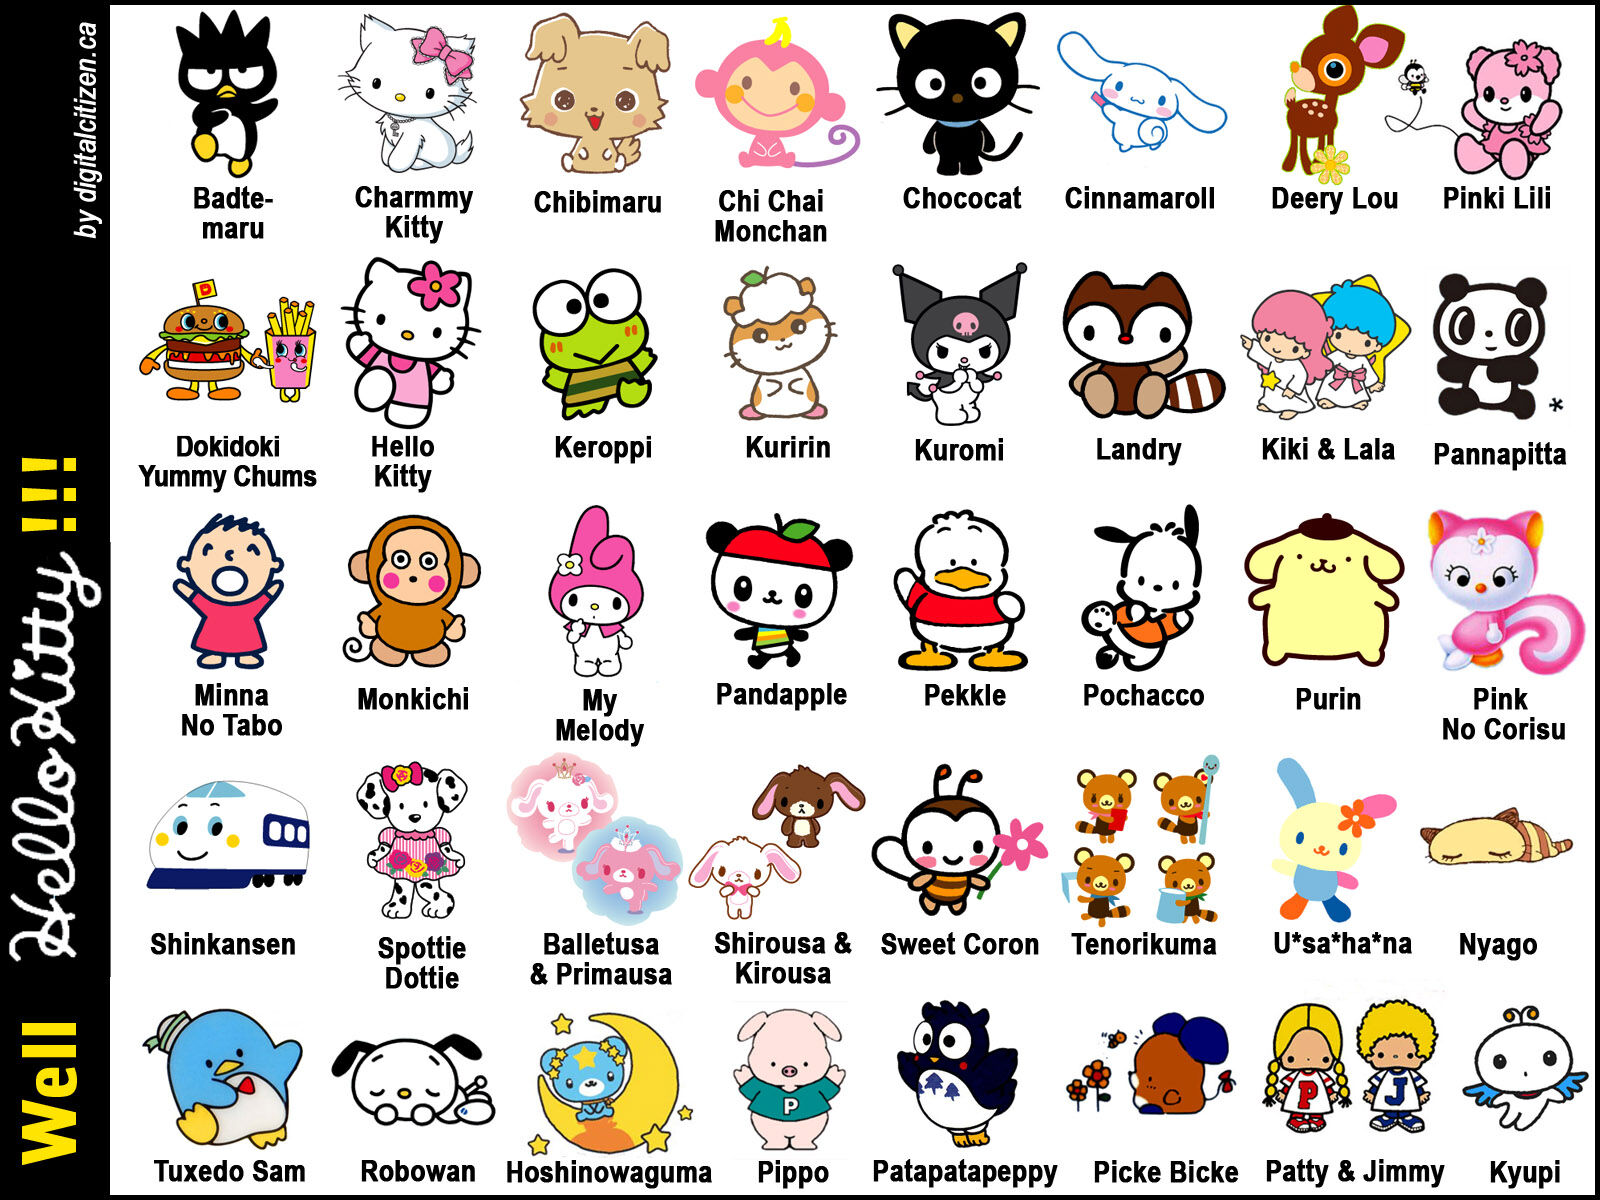 https://static.wikia.nocookie.net/hellokitty/images/5/5a/Hello_Kitty_Characters.jpg/revision/latest/scale-to-width-down/1600?cb=20130124223935